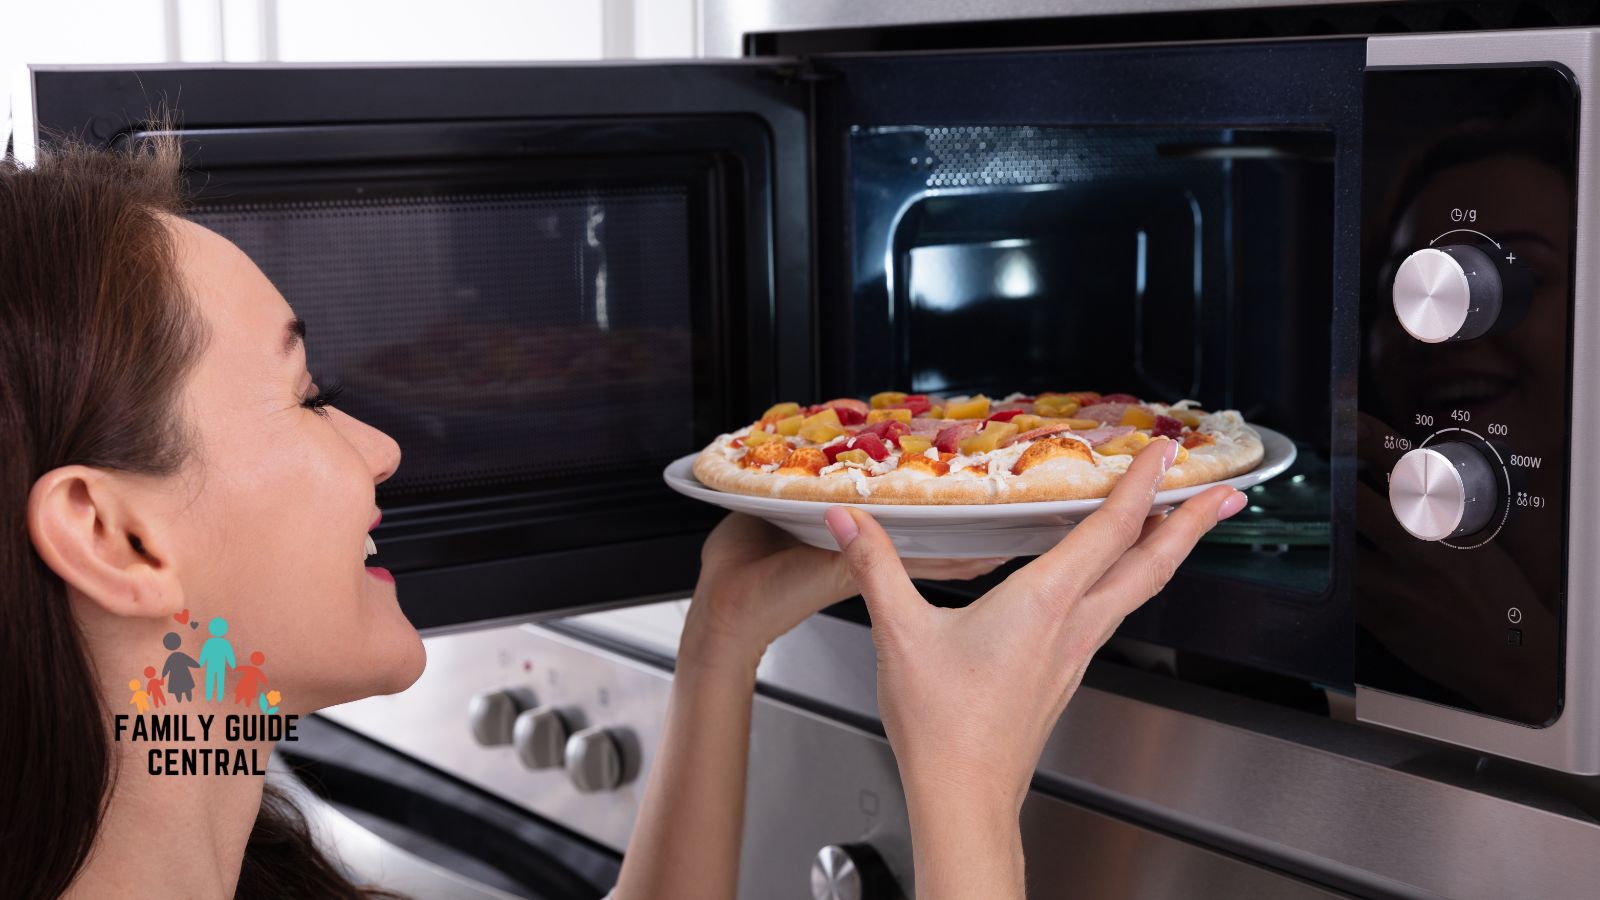 Lady microwaving a pizza - familyguidecentral.com